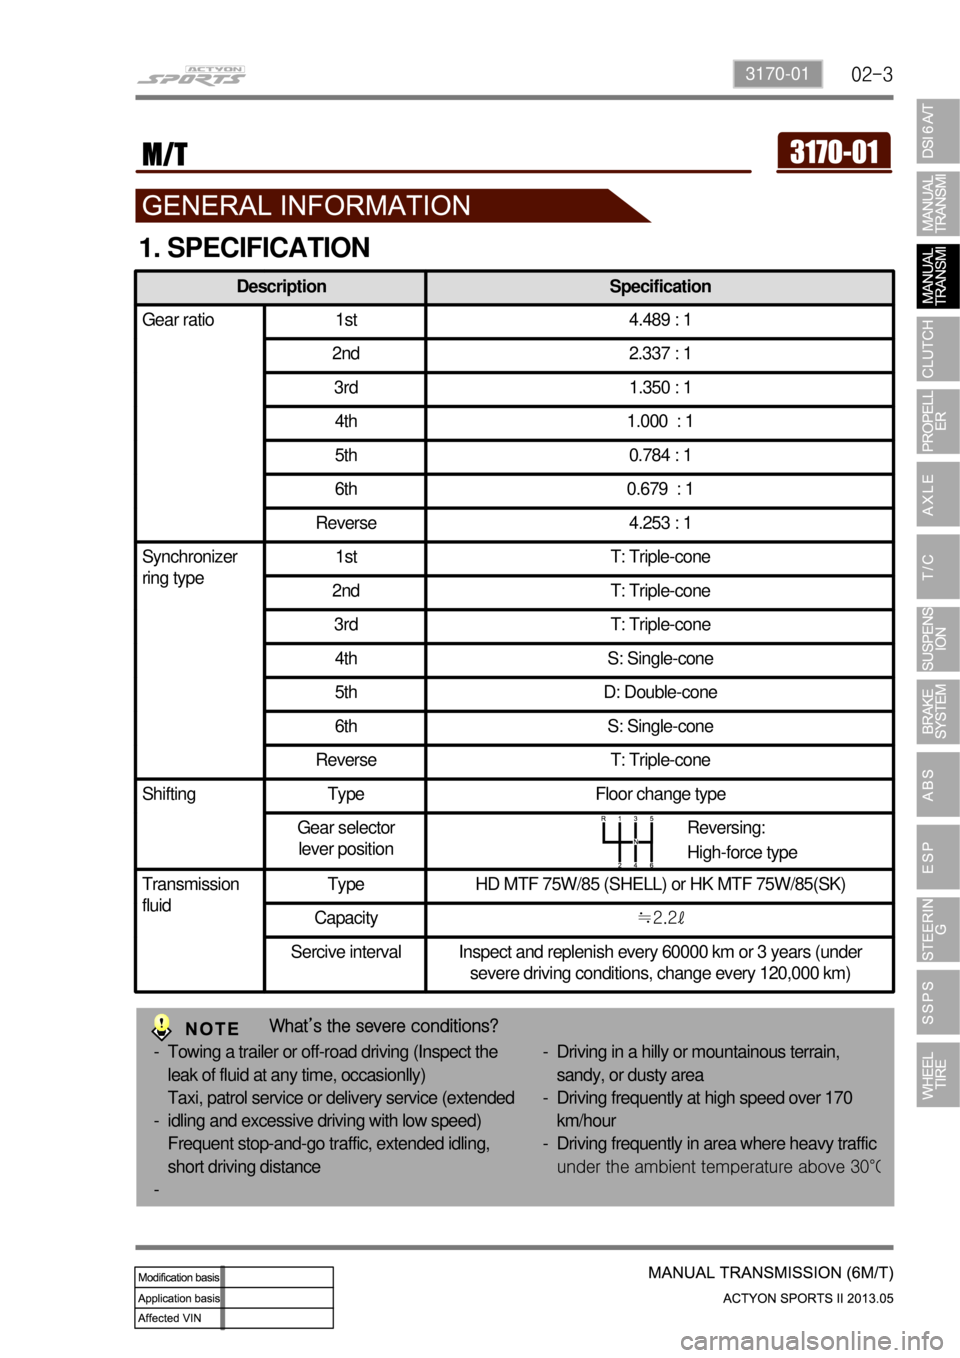 SSANGYONG NEW ACTYON SPORTS 2013  Service Manual 02-33170-01
Description Specification
Gear ratio 1st 4.489 : 1
2nd 2.337 : 1
3rd 1.350 : 1
4th 1.000  : 1
5th 0.784 : 1
6th 0.679  : 1
Reverse 4.253 : 1
Synchronizer 
ring type1st T: Triple-cone
2nd T